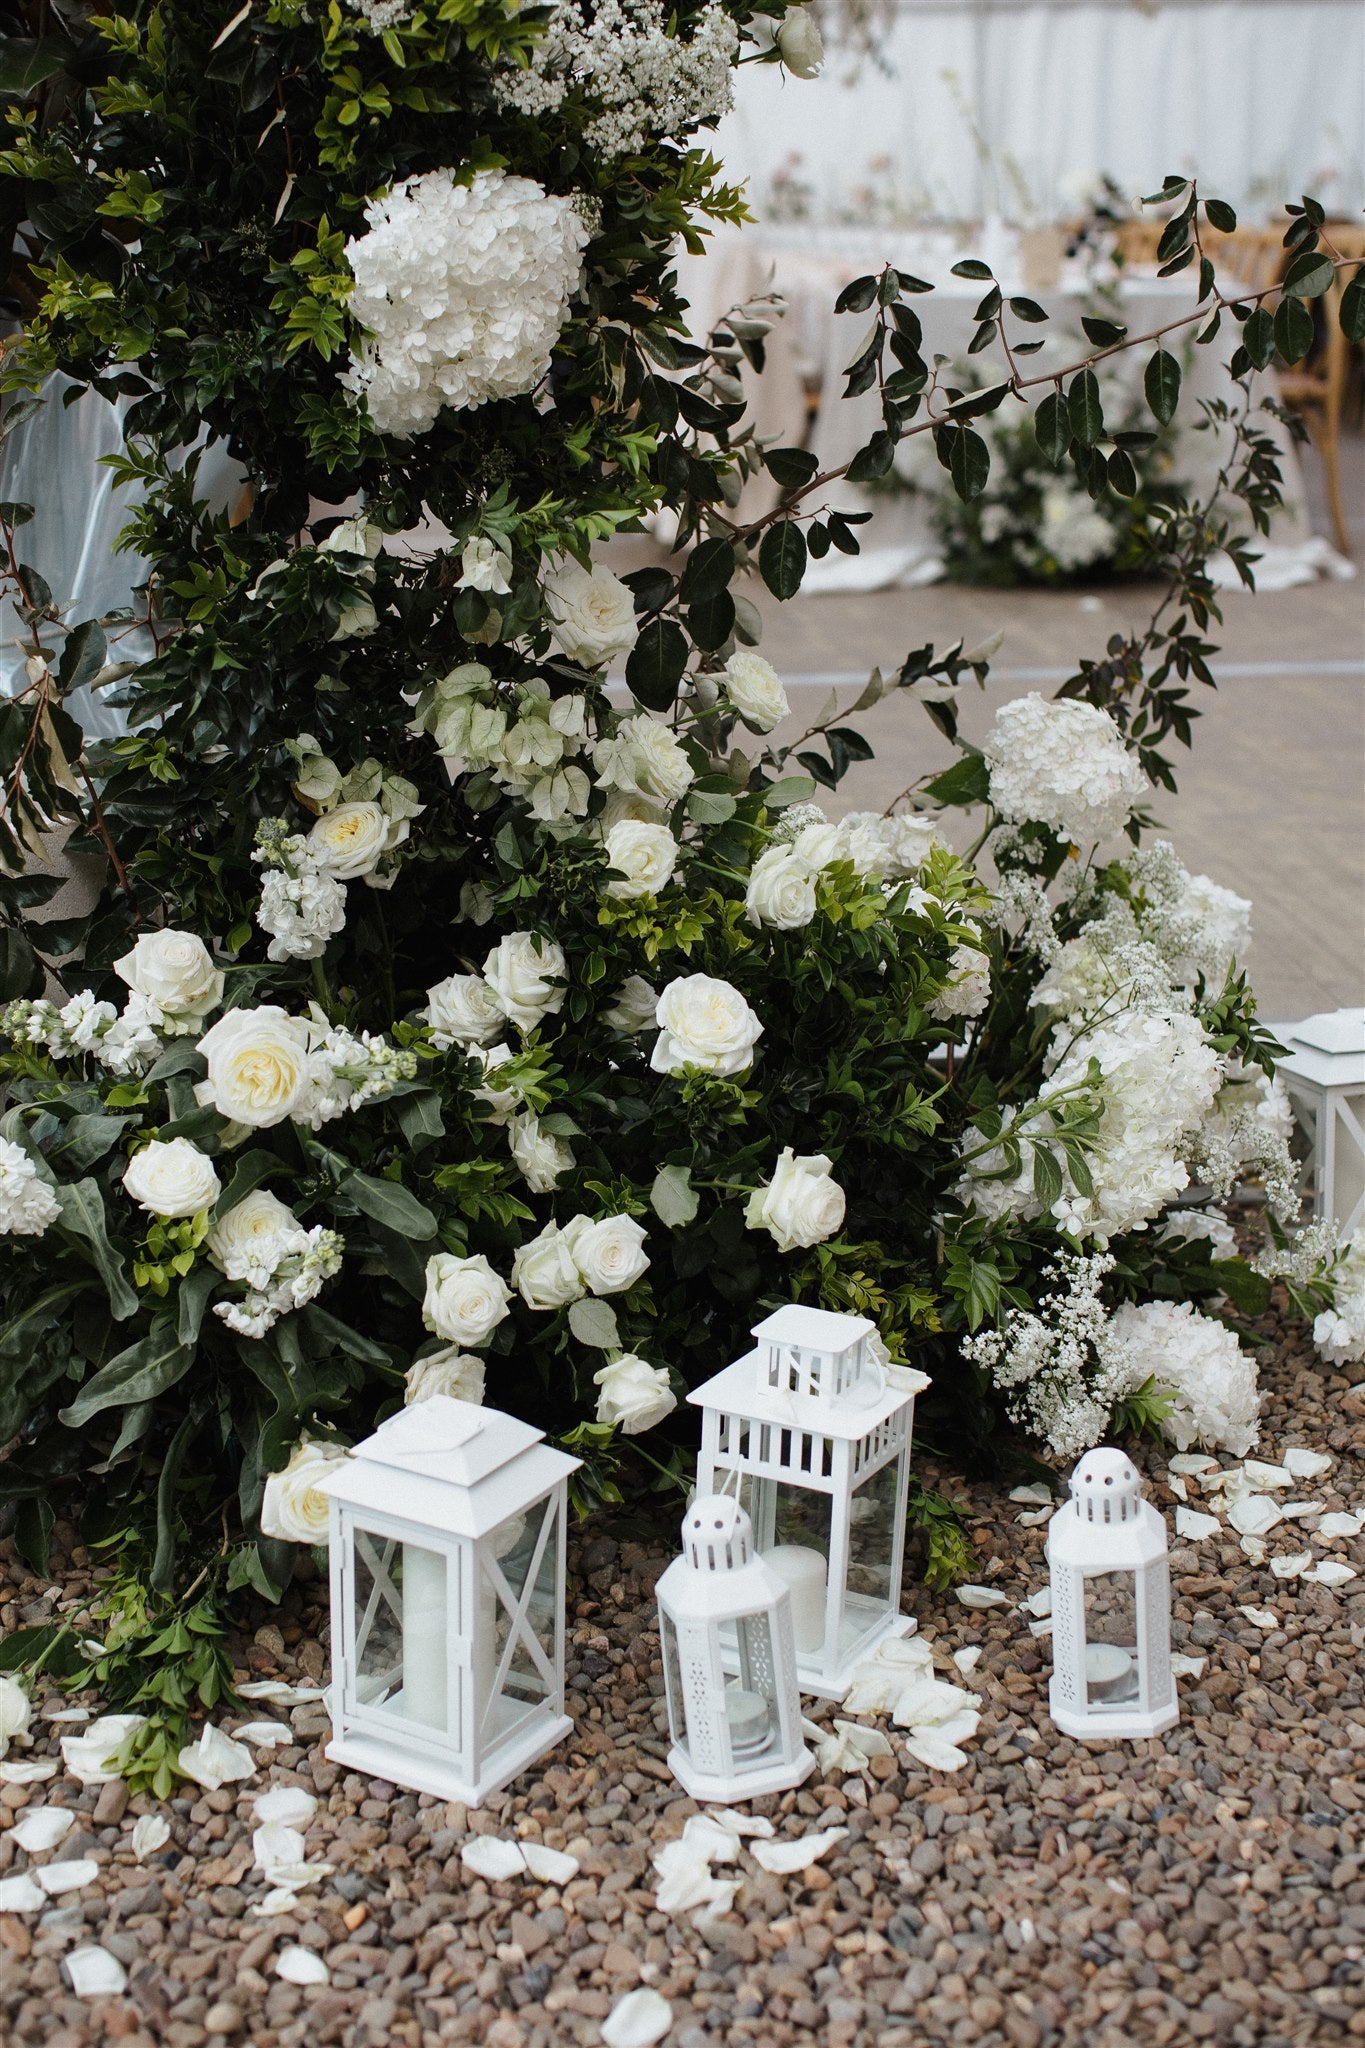 White Lanterns Candle Holders For Hire | For Love & Living Weddings & Events Gold Coast